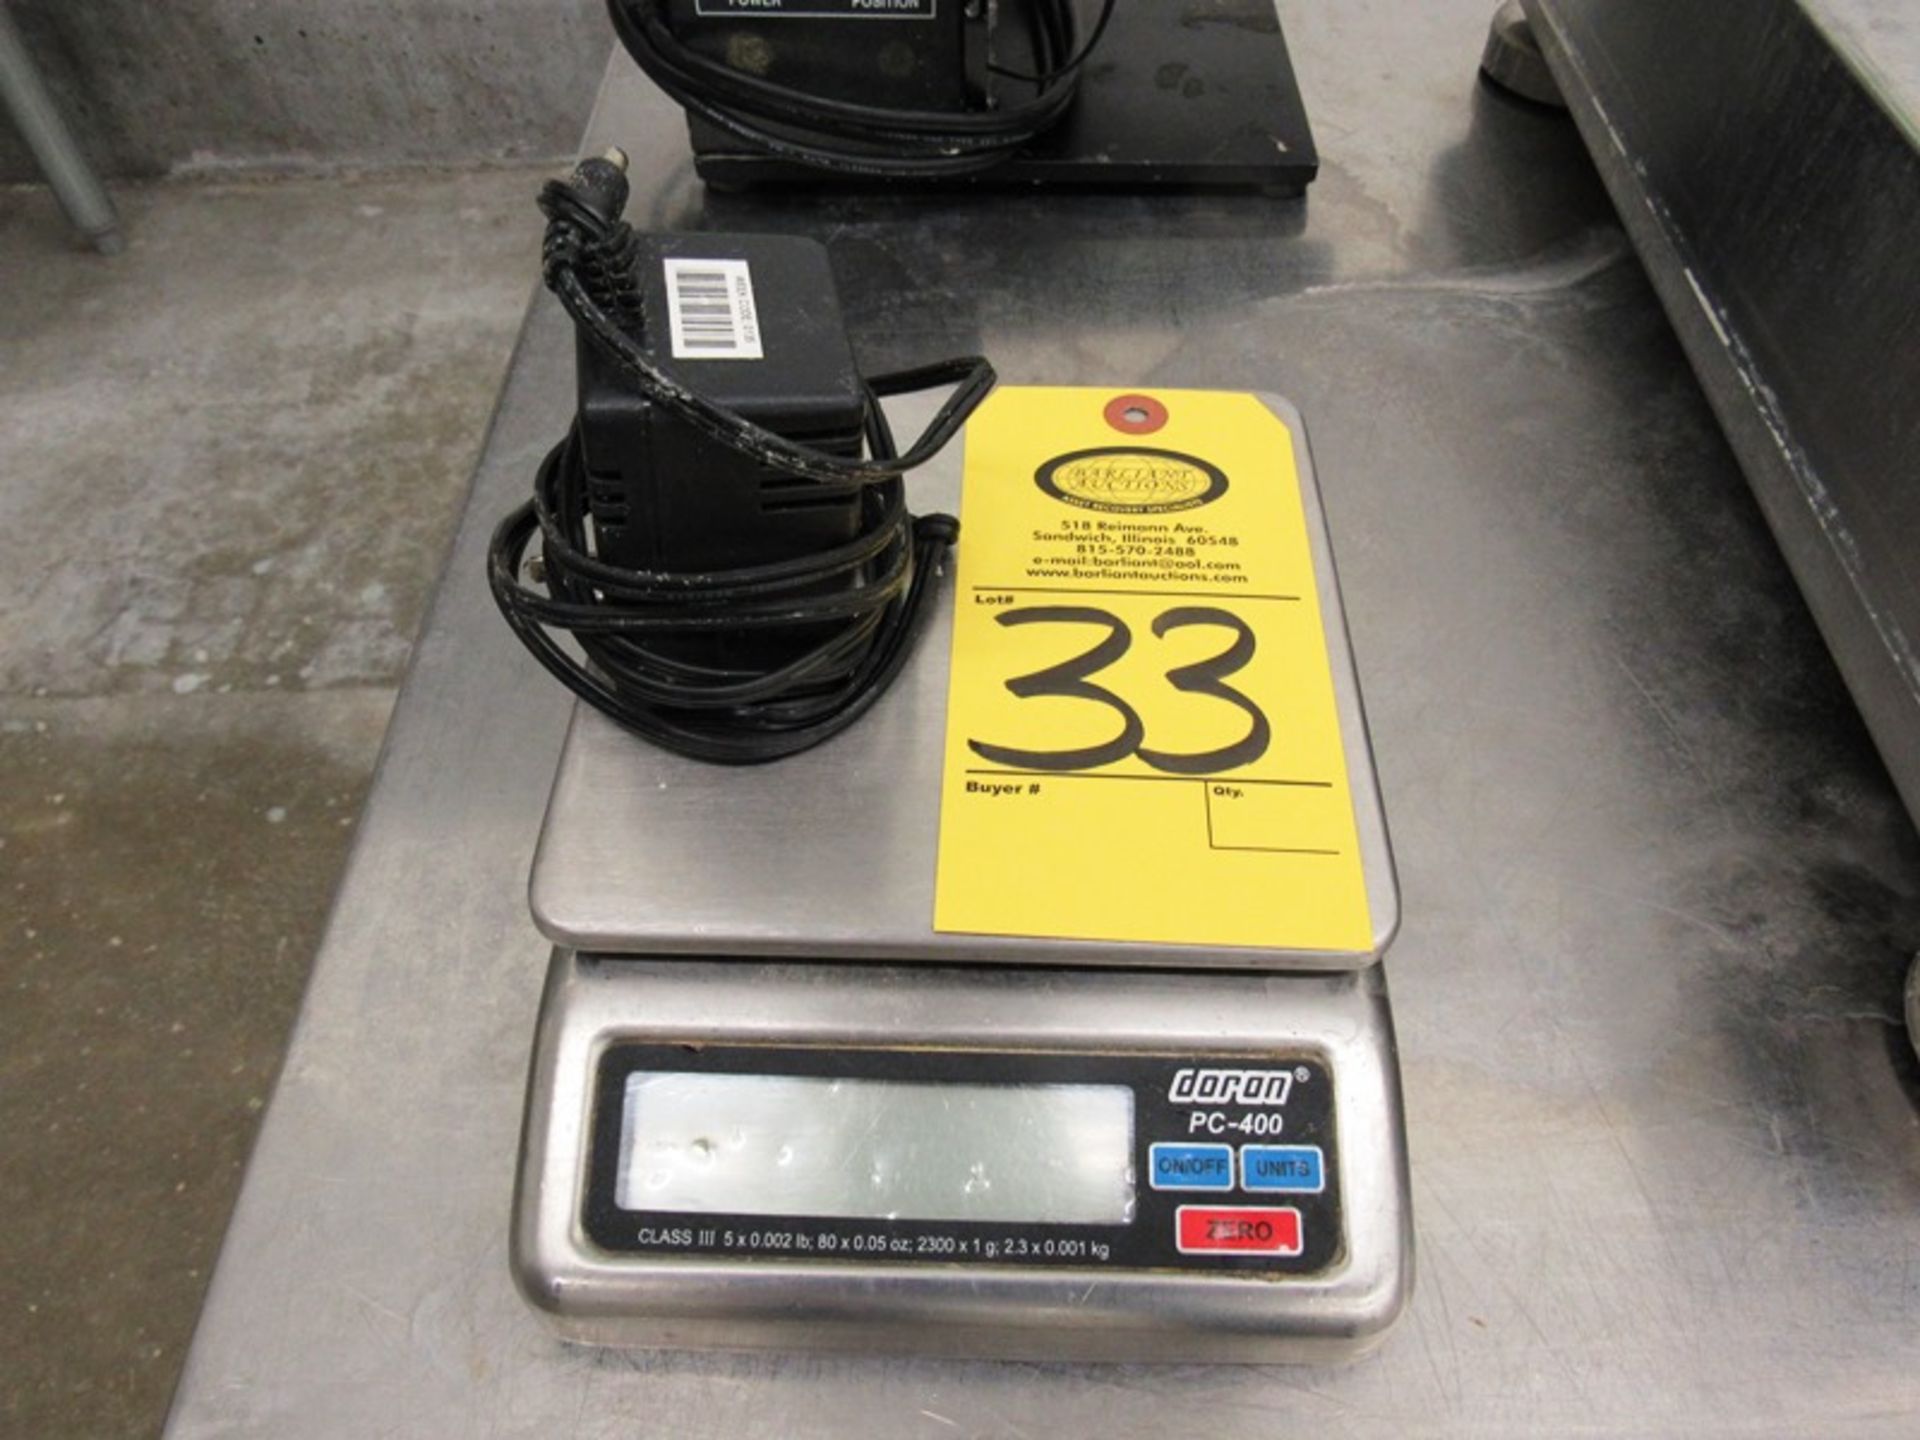 Doron Mdl. PC400 Stainless Steel Digital Scale, 6 1/2" W X 6 1/2" L top, 2300 g. capacity (Removal